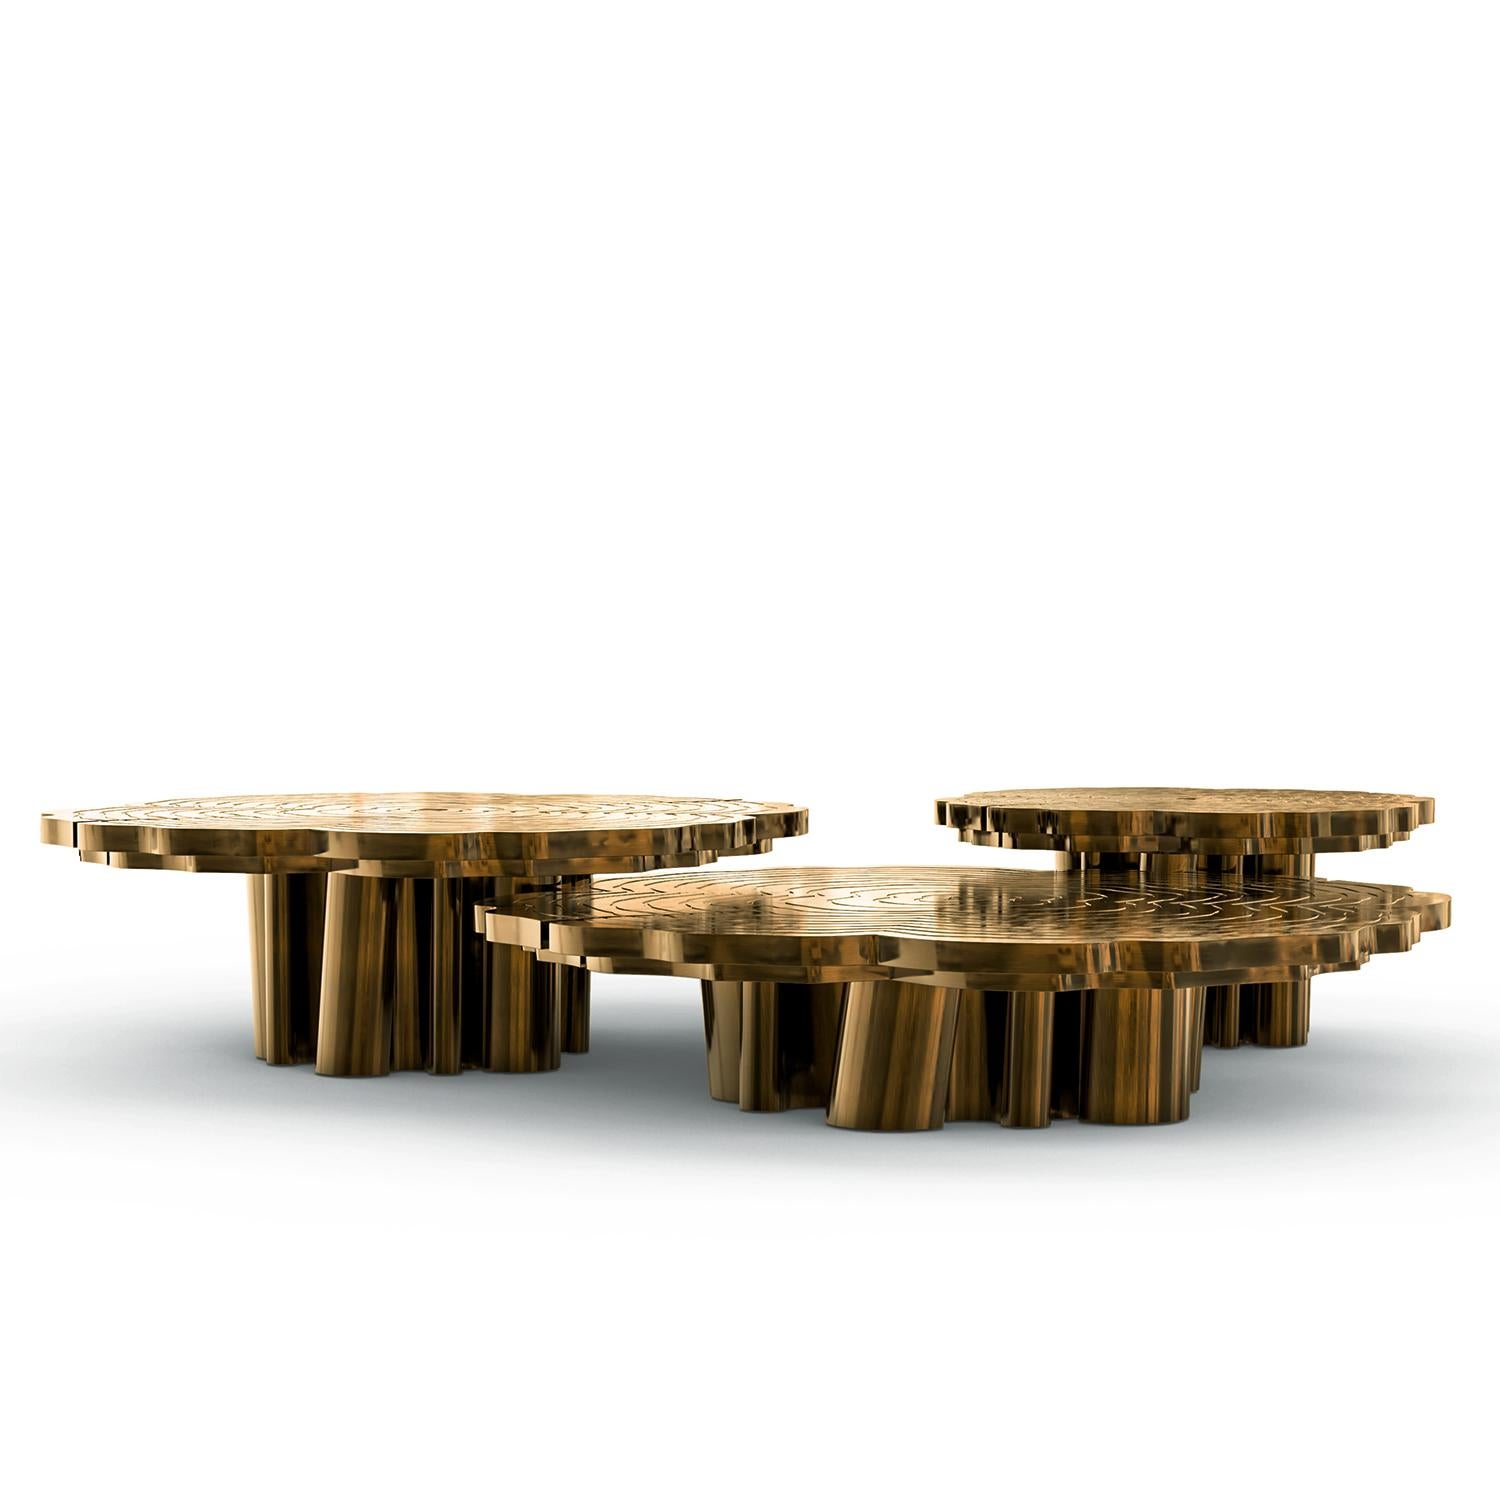 Coffee table Tresor Patinated set of 3 with all structure of each table
in solid brass in polished and patinated finish. With gloss varnished.
Measures: Big/ Diameter 130 x H 30cm.
Medium/ Diameter 100 x H 30 cm.
Small/ Diameter 70 x H 50 cm.